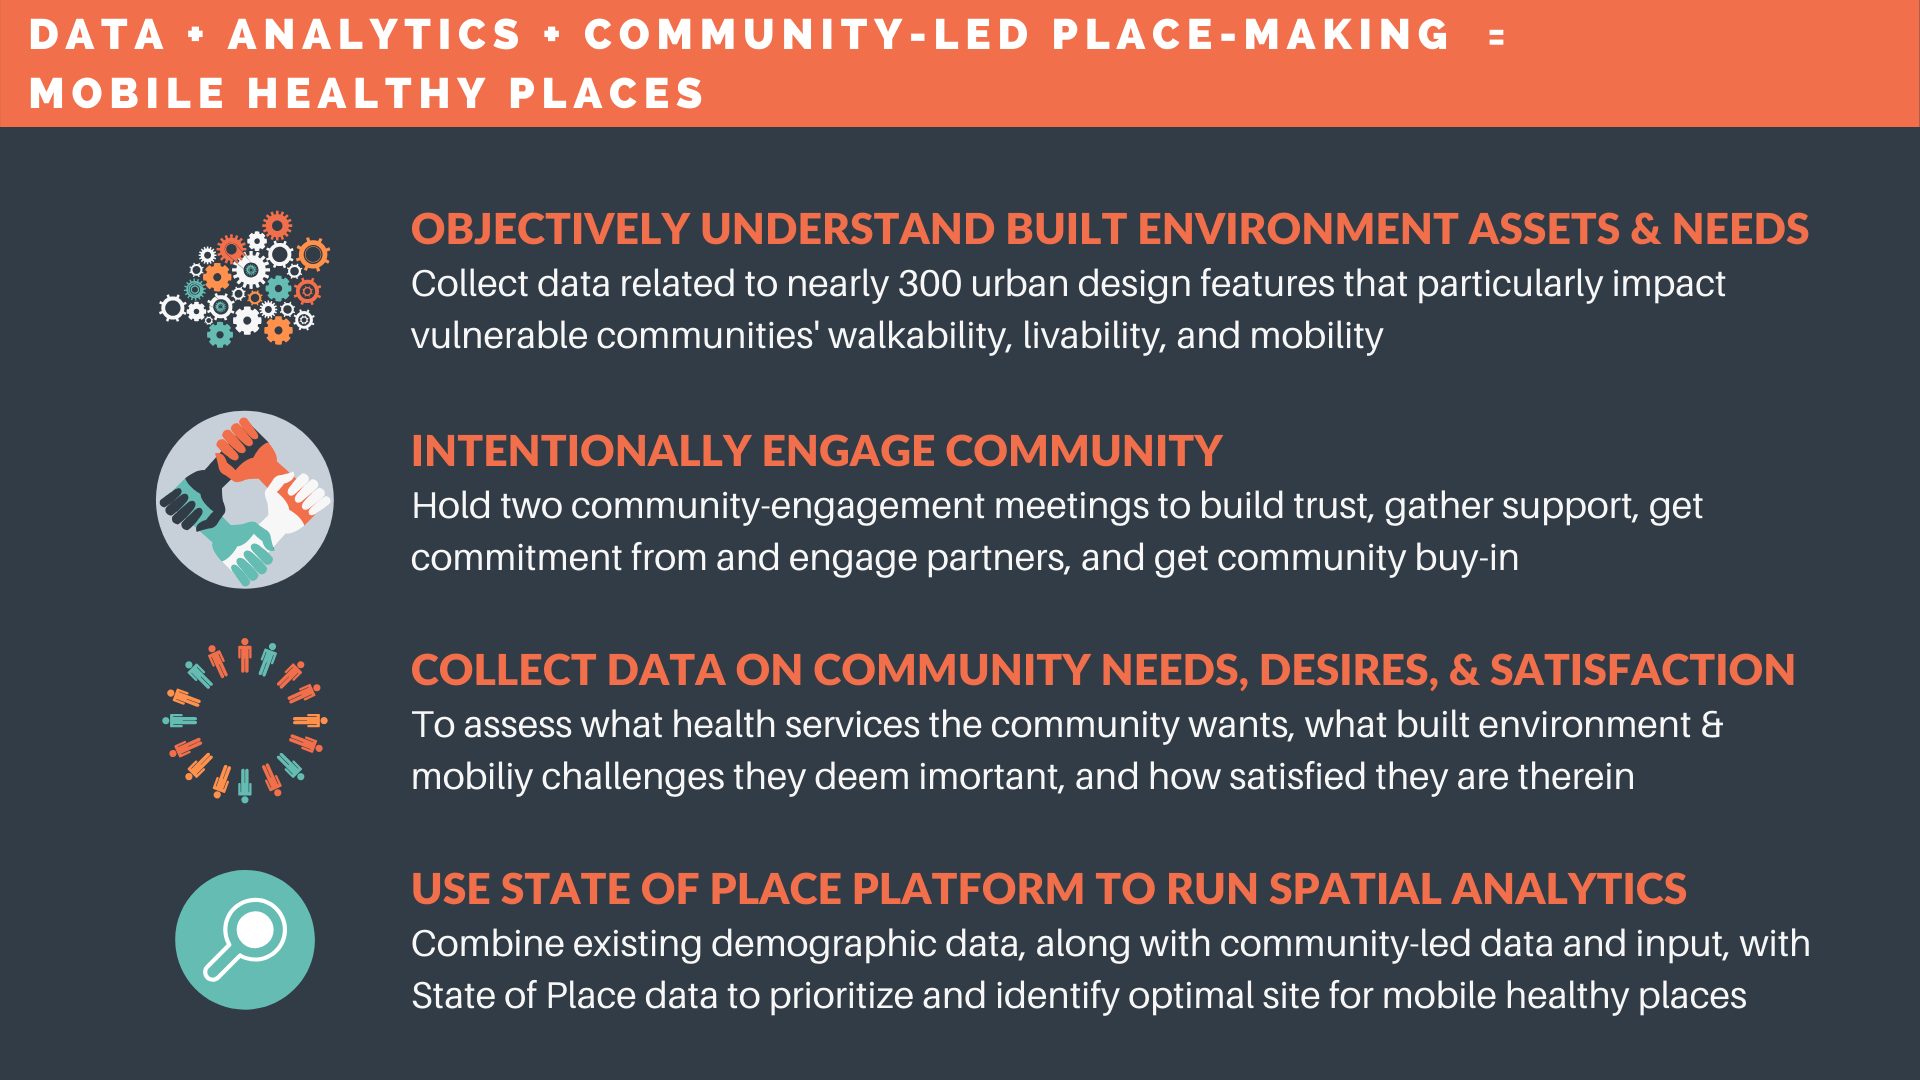  We'll pair built environment and community-led data with engagement to deliver a mobile healthy place, by: Creating a prioritized list of locations for mobile healthy places, activating one such location, and providing high-level recommendations for